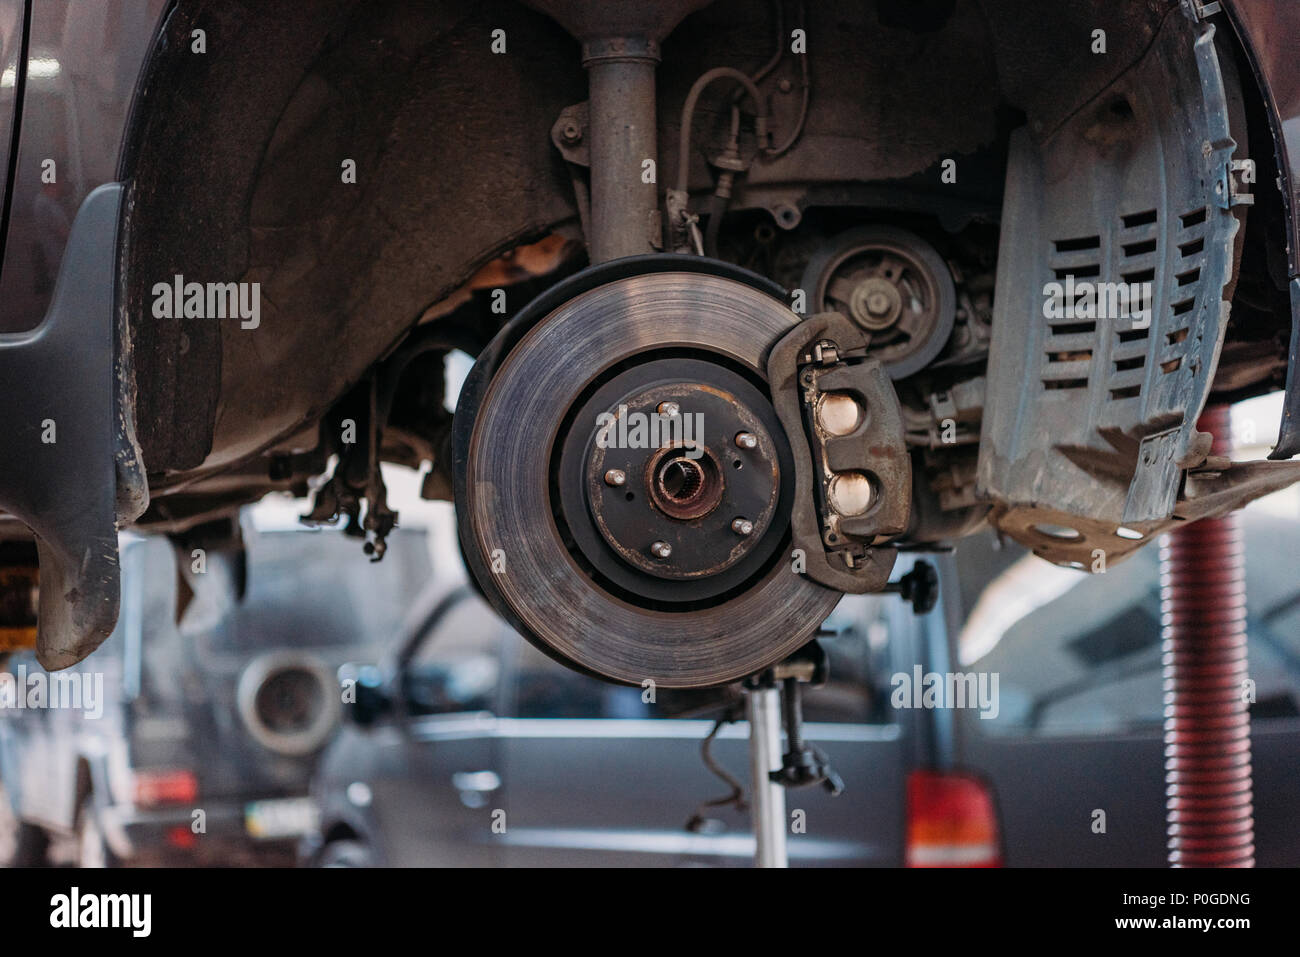 Close up of a Car in a service with brake shoe exposed. Stock Photo